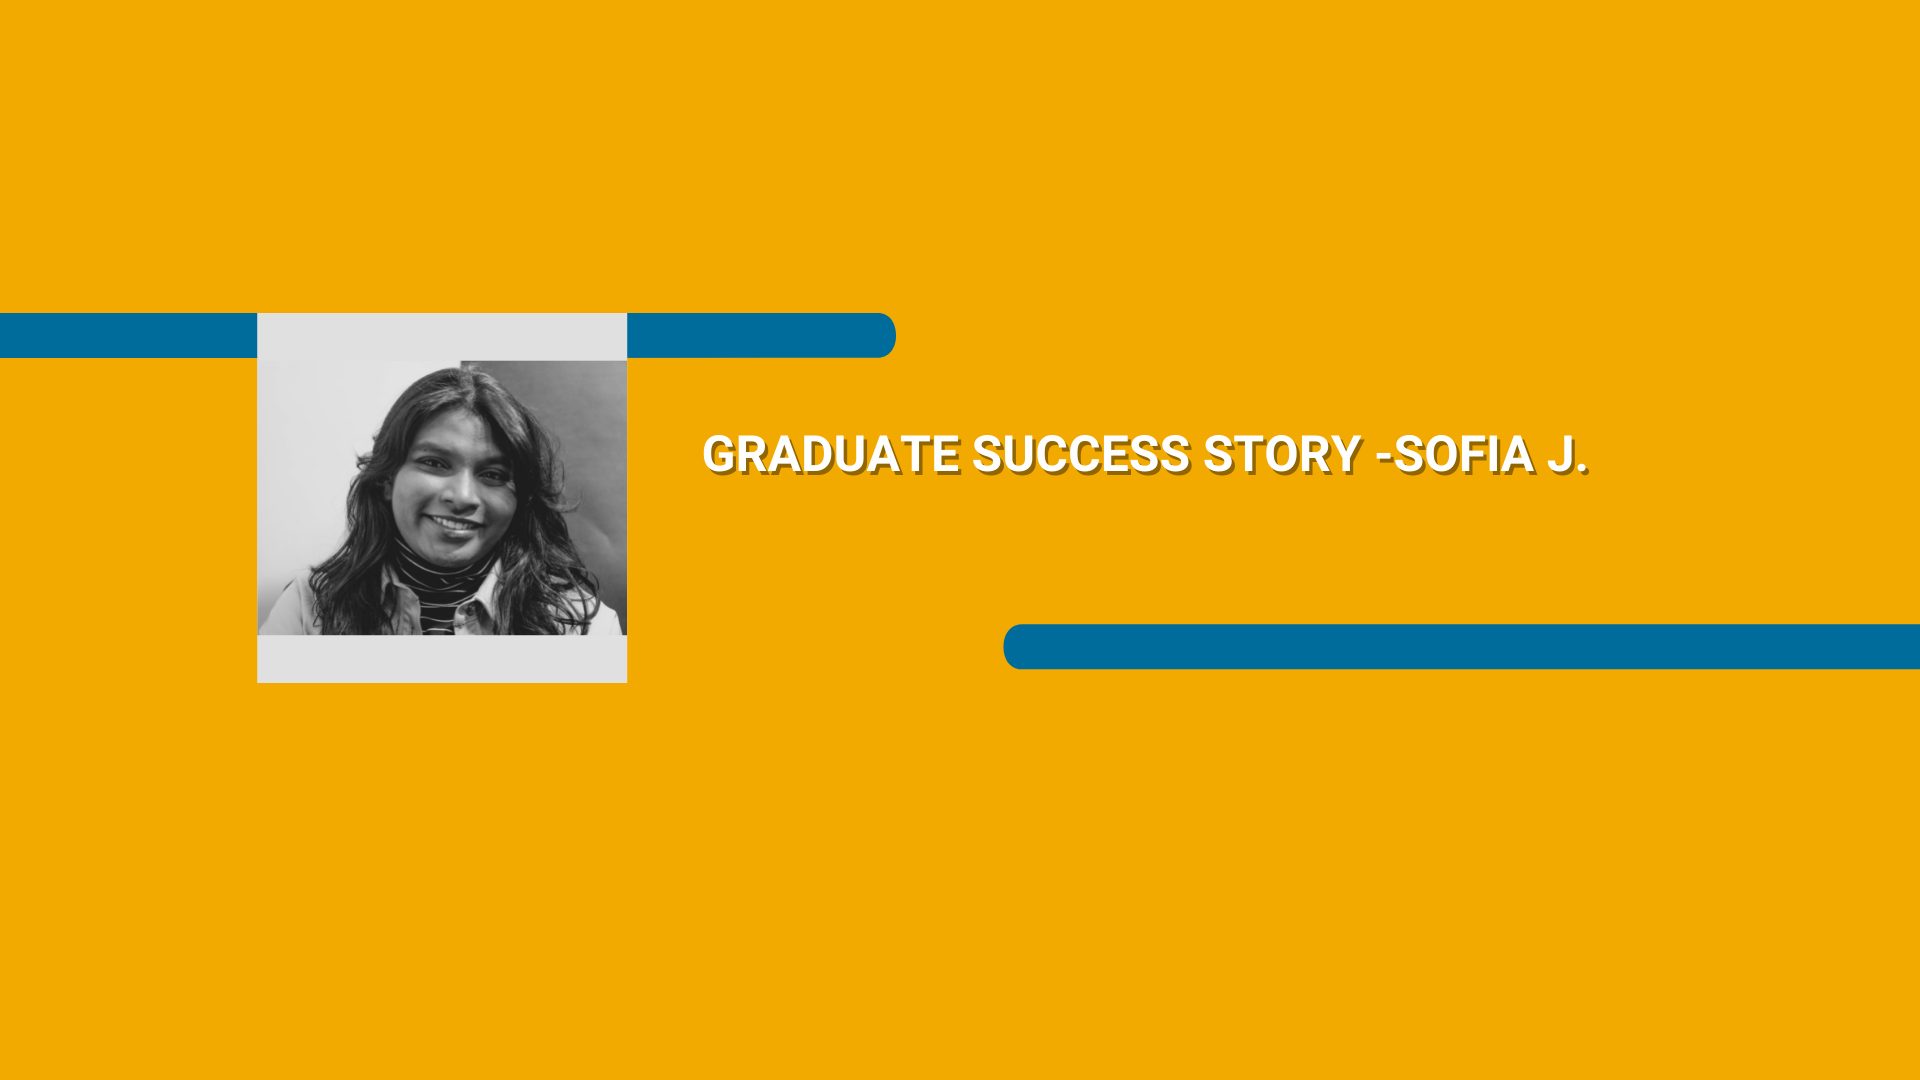 Orange rectangle with a black and white picture of a woman and Graduate Success Story - Sofia J. text in white font